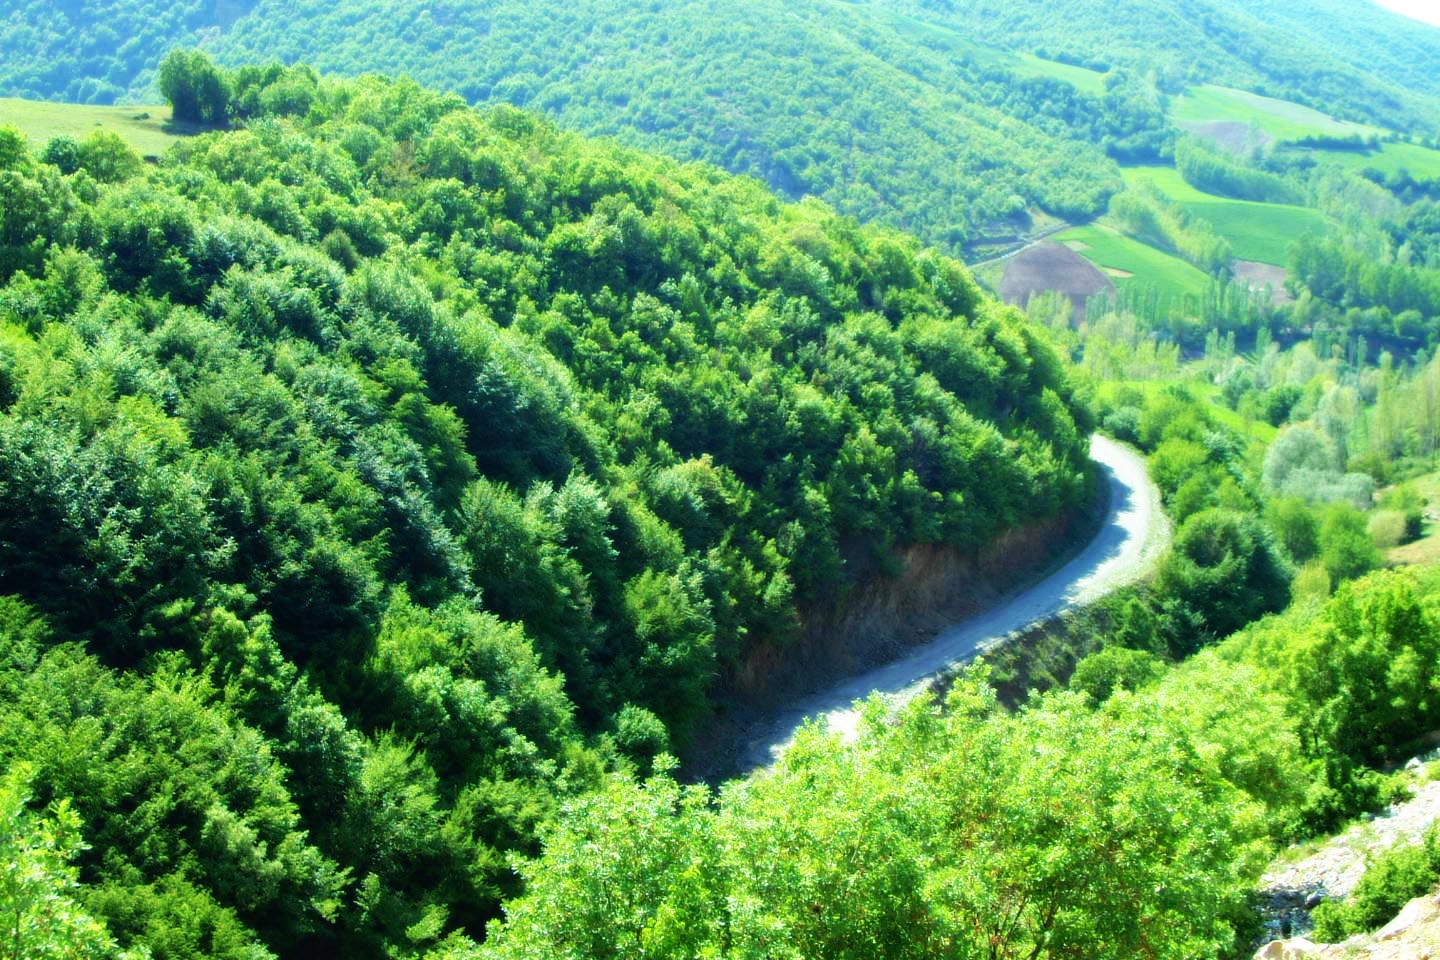 the lush green forests and river meander through a valley